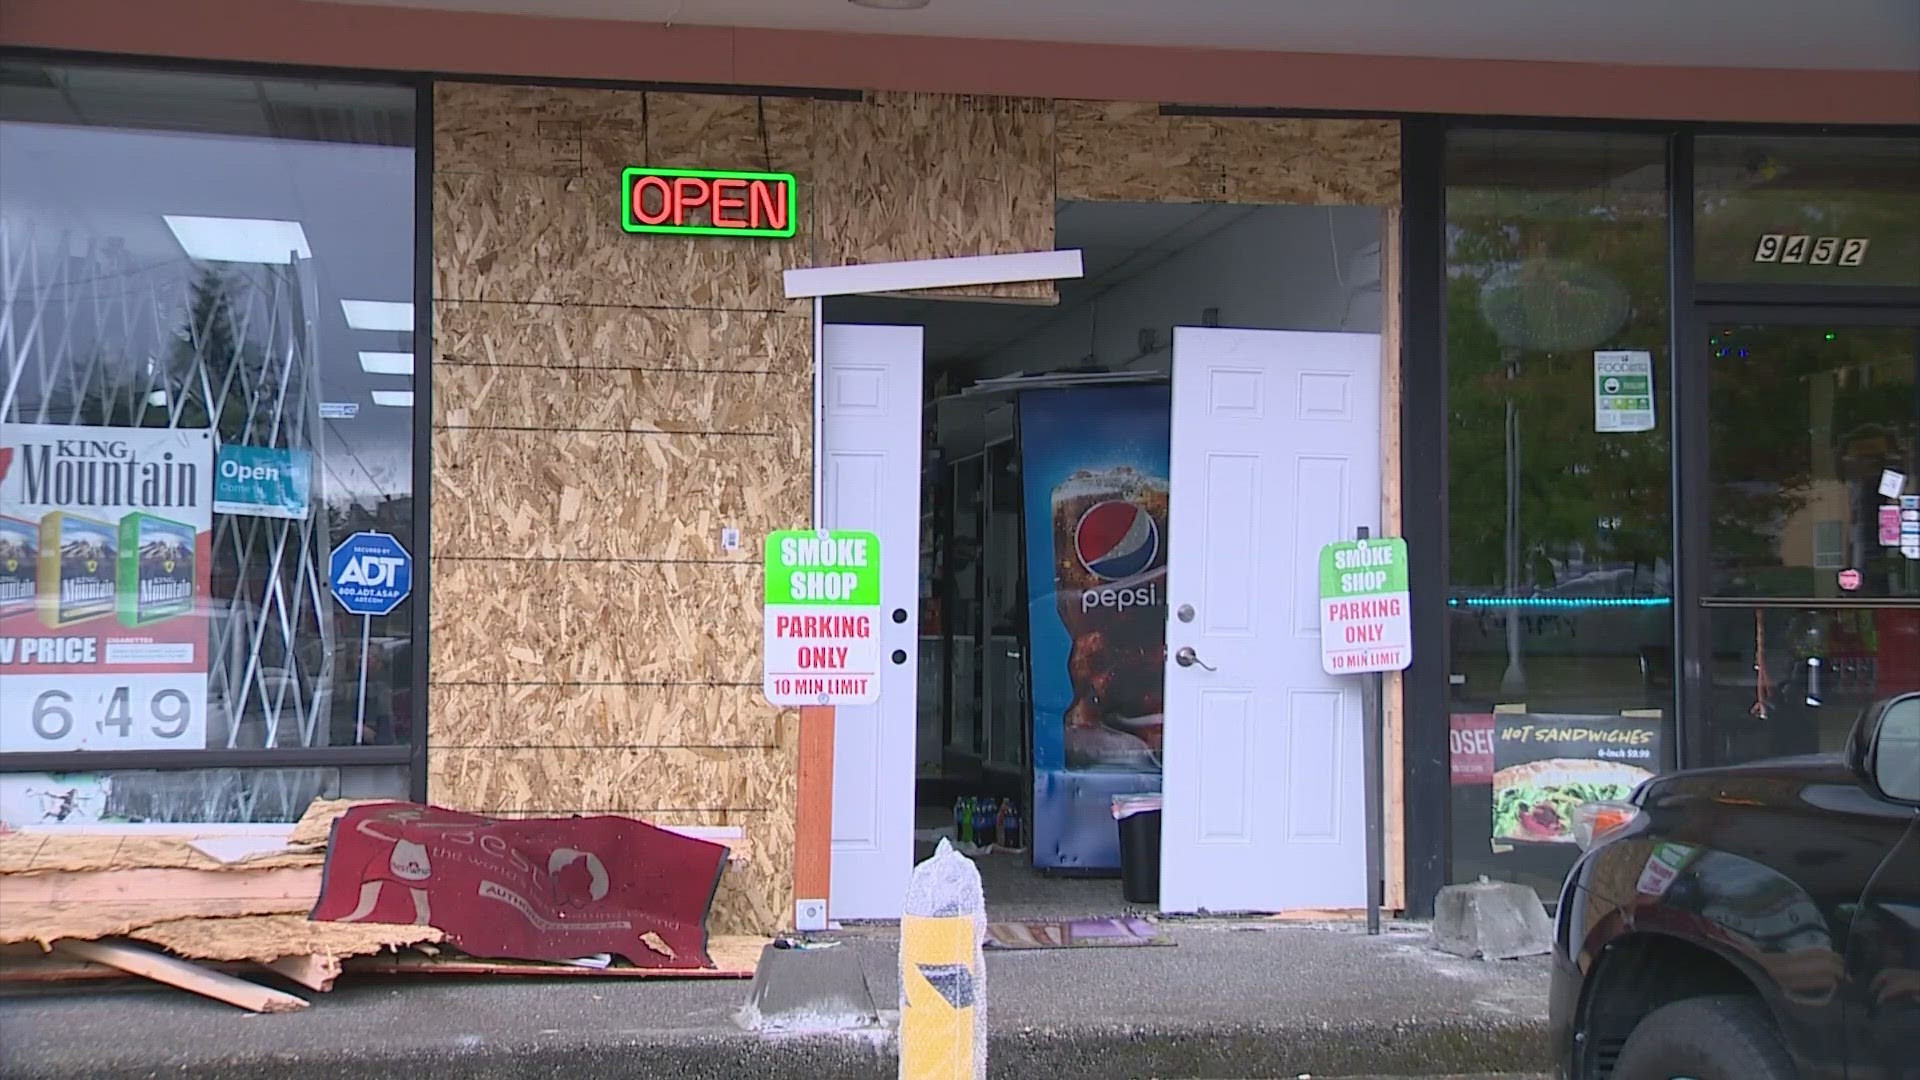 The smoke shop was also hit with a smash-and-grab on Tuesday morning. The business owner had just finished boarding up the storefront.